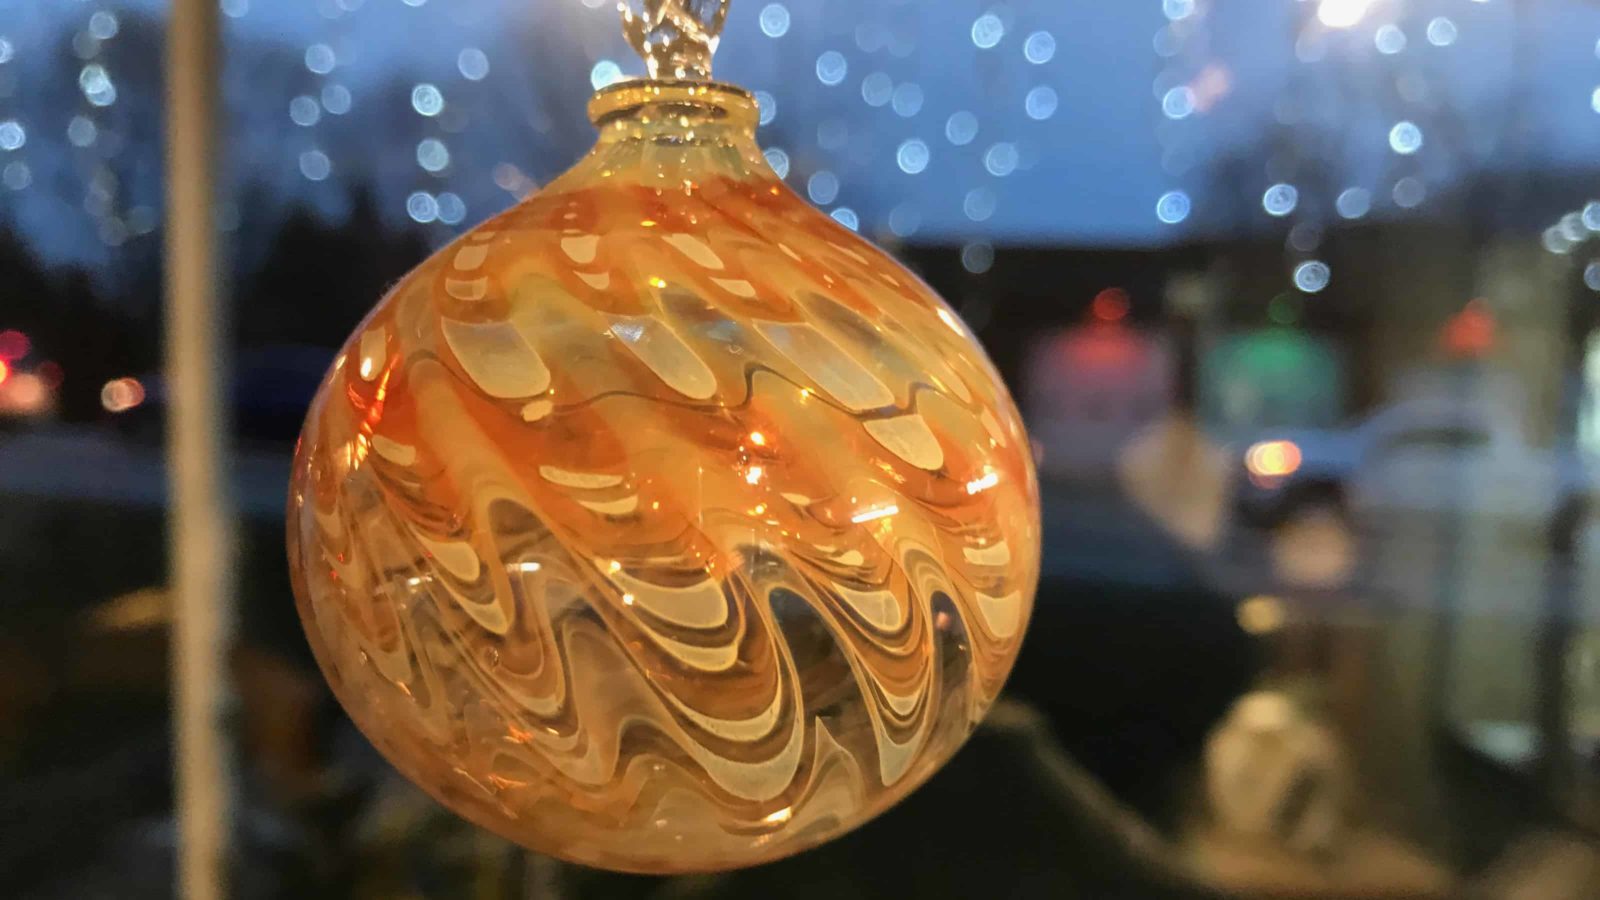 A handmade glass ornament glows warmly at Cheshire Glassworks.